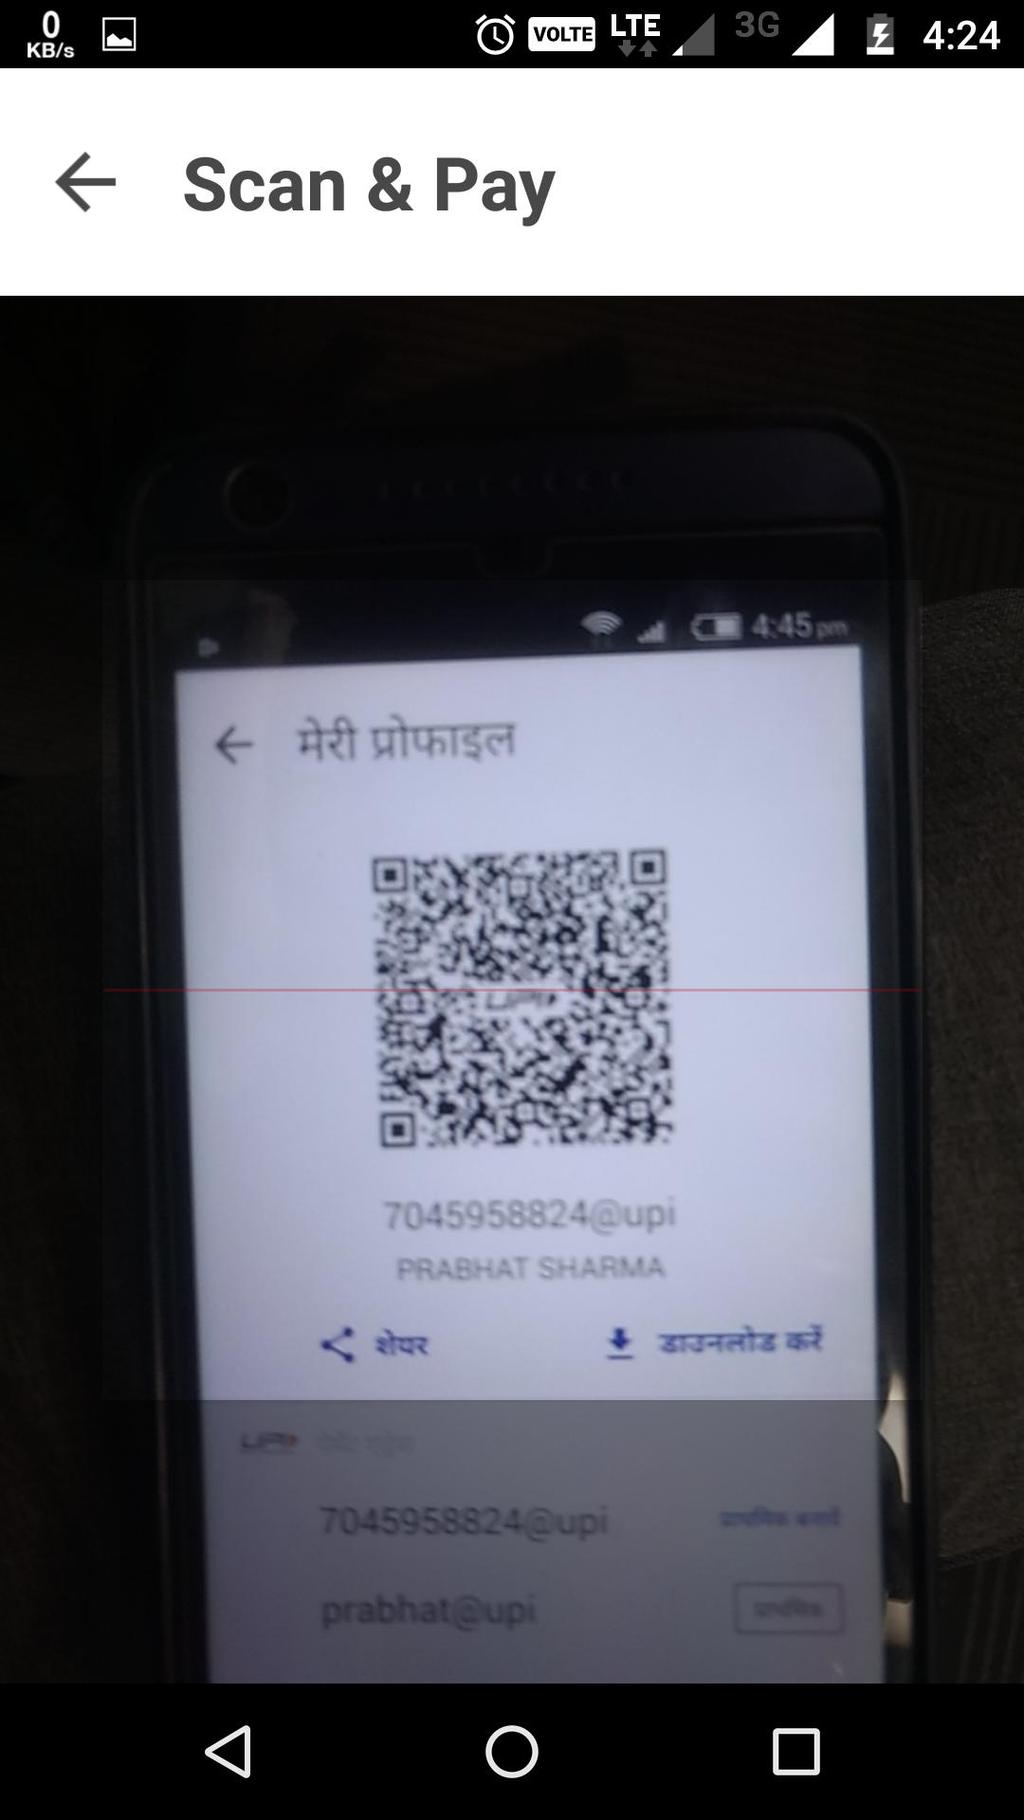 Scan and Pay on BHIM Your Bank Select Scan and Pay Application opens a QR scanner Scan the QR